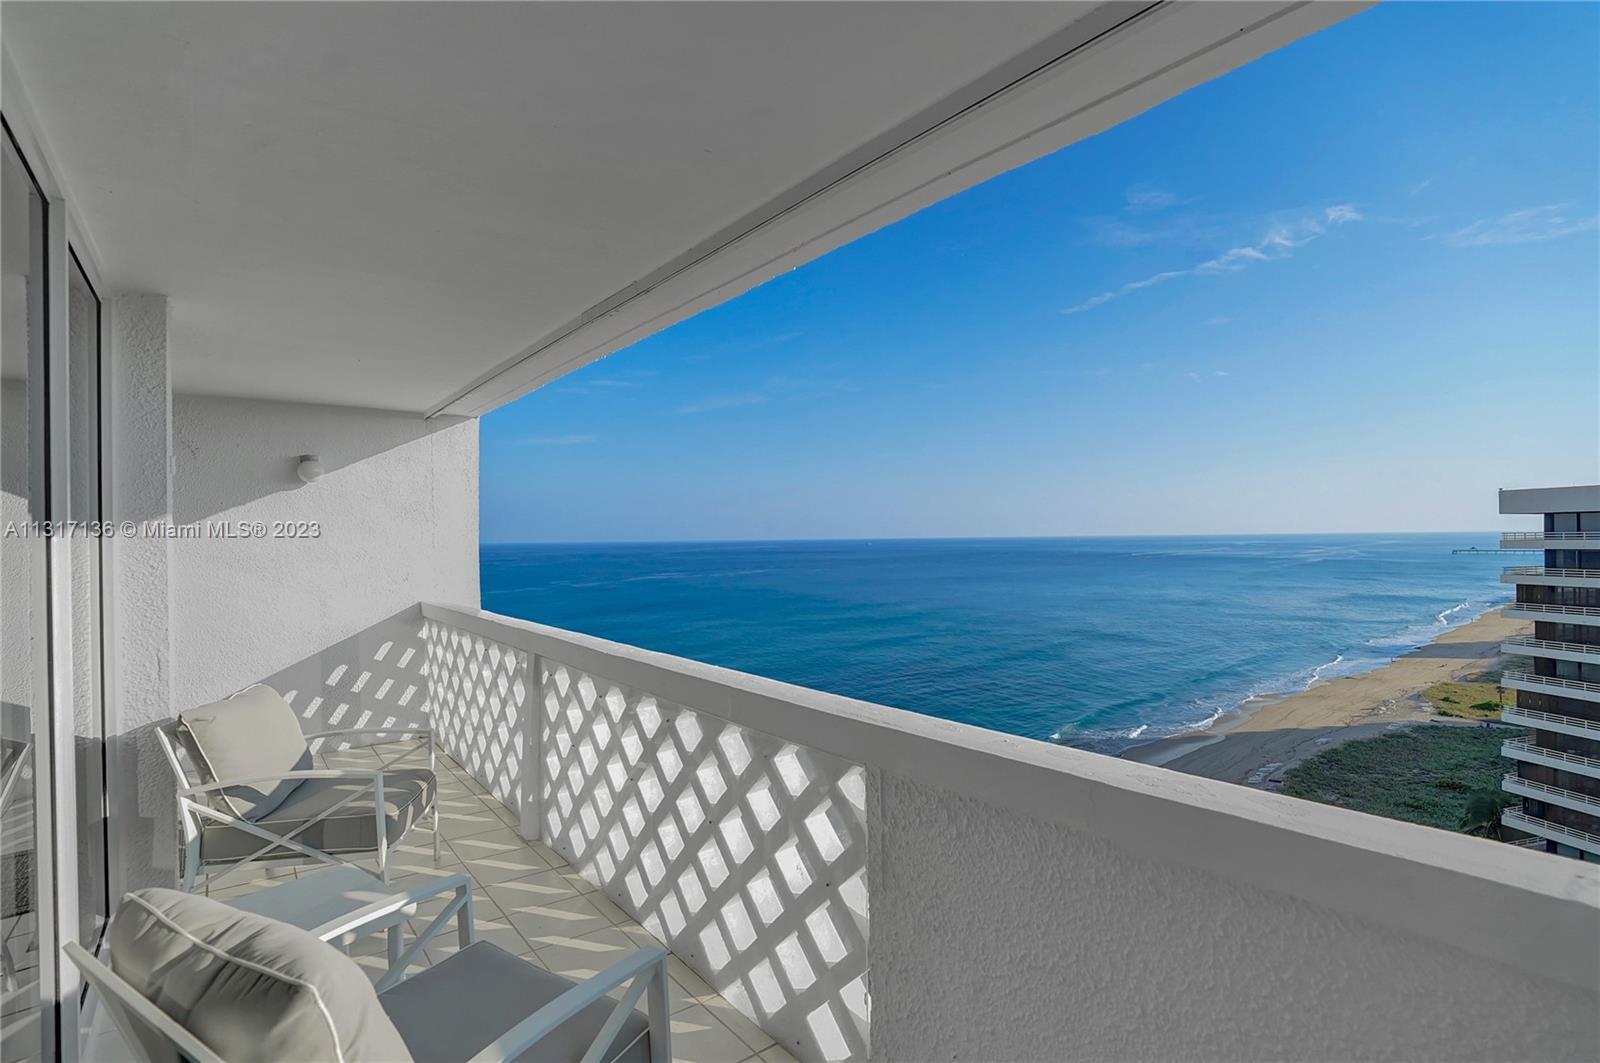 RARELY AVAILABLE 17th FLOOR STUNNER UNIT WITH BREATHTAKING OCEAN VIEWS! 
Beach lifestyle to its bes